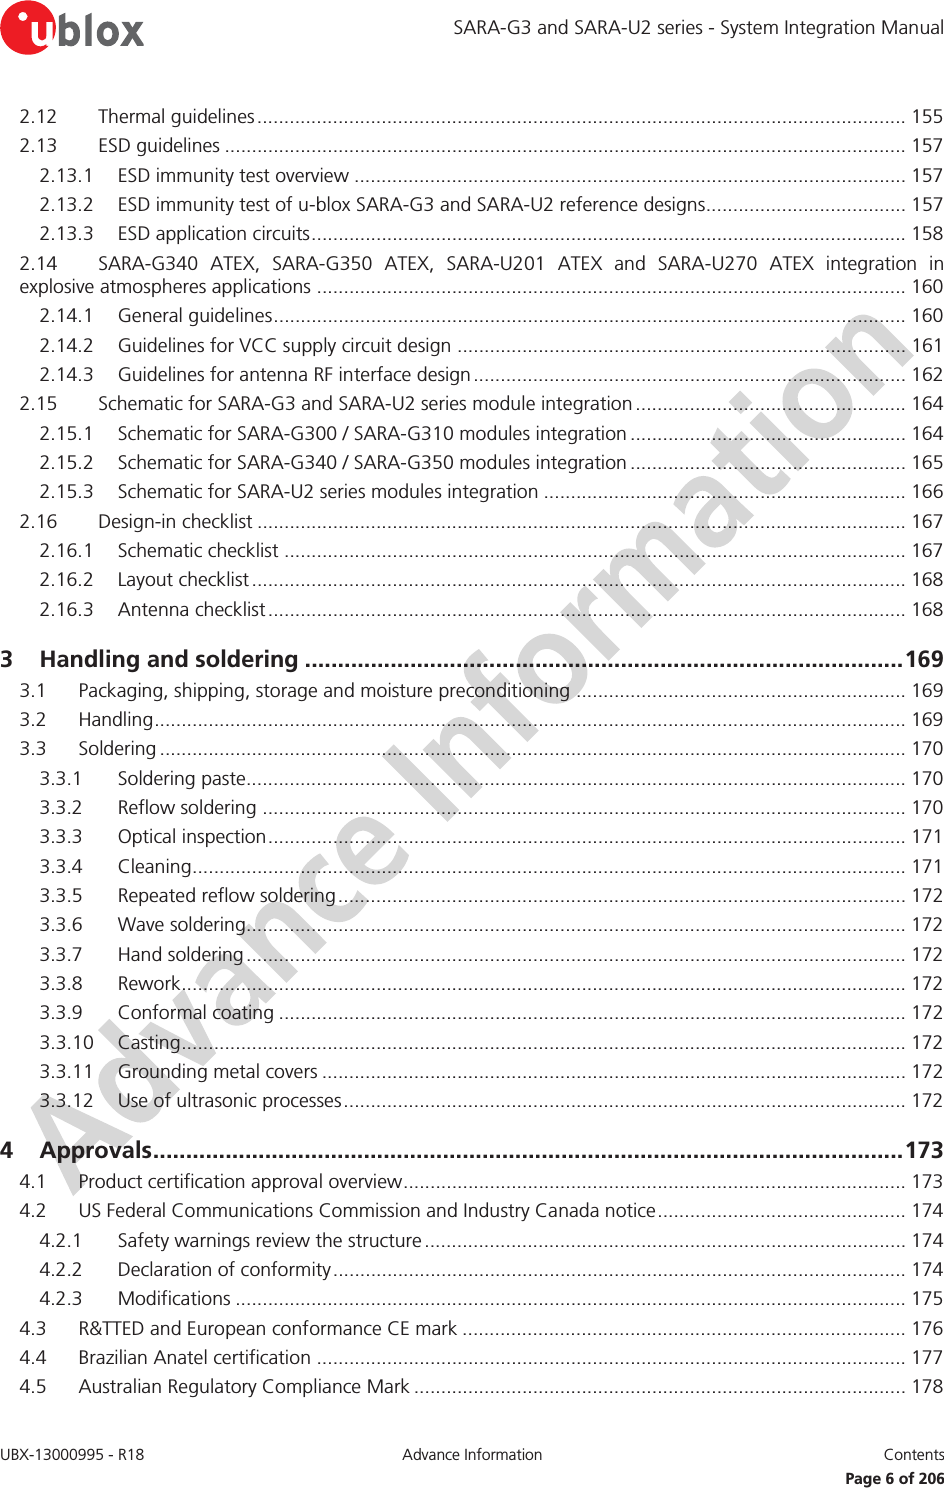 SARA-G3 and SARA-U2 series - System Integration Manual UBX-13000995 - R18  Advance Information  Contents   Page 6 of 206 2.12 Thermal guidelines ........................................................................................................................ 155 2.13 ESD guidelines .............................................................................................................................. 157 2.13.1 ESD immunity test overview ...................................................................................................... 157 2.13.2 ESD immunity test of u-blox SARA-G3 and SARA-U2 reference designs..................................... 157 2.13.3 ESD application circuits .............................................................................................................. 158 2.14 SARA-G340 ATEX, SARA-G350 ATEX, SARA-U201 ATEX and SARA-U270 ATEX integration in explosive atmospheres applications ............................................................................................................. 160 2.14.1 General guidelines ..................................................................................................................... 160 2.14.2 Guidelines for VCC supply circuit design ................................................................................... 161 2.14.3 Guidelines for antenna RF interface design ................................................................................ 162 2.15 Schematic for SARA-G3 and SARA-U2 series module integration .................................................. 164 2.15.1 Schematic for SARA-G300 / SARA-G310 modules integration ................................................... 164 2.15.2 Schematic for SARA-G340 / SARA-G350 modules integration ................................................... 165 2.15.3 Schematic for SARA-U2 series modules integration ................................................................... 166 2.16 Design-in checklist ........................................................................................................................ 167 2.16.1 Schematic checklist ................................................................................................................... 167 2.16.2 Layout checklist ......................................................................................................................... 168 2.16.3 Antenna checklist ...................................................................................................................... 168 3 Handling and soldering ........................................................................................... 169 3.1 Packaging, shipping, storage and moisture preconditioning ............................................................. 169 3.2 Handling ........................................................................................................................................... 169 3.3 Soldering .......................................................................................................................................... 170 3.3.1 Soldering paste.......................................................................................................................... 170 3.3.2 Reflow soldering ....................................................................................................................... 170 3.3.3 Optical inspection ...................................................................................................................... 171 3.3.4 Cleaning .................................................................................................................................... 171 3.3.5 Repeated reflow soldering ......................................................................................................... 172 3.3.6 Wave soldering.......................................................................................................................... 172 3.3.7 Hand soldering .......................................................................................................................... 172 3.3.8 Rework ...................................................................................................................................... 172 3.3.9 Conformal coating .................................................................................................................... 172 3.3.10 Casting ...................................................................................................................................... 172 3.3.11 Grounding metal covers ............................................................................................................ 172 3.3.12 Use of ultrasonic processes ........................................................................................................ 172 4 Approvals .................................................................................................................. 173 4.1 Product certification approval overview ............................................................................................. 173 4.2 US Federal Communications Commission and Industry Canada notice .............................................. 174 4.2.1 Safety warnings review the structure ......................................................................................... 174 4.2.2 Declaration of conformity .......................................................................................................... 174 4.2.3 Modifications ............................................................................................................................ 175 4.3 R&amp;TTED and European conformance CE mark .................................................................................. 176 4.4 Brazilian Anatel certification ............................................................................................................. 177 4.5 Australian Regulatory Compliance Mark ........................................................................................... 178 